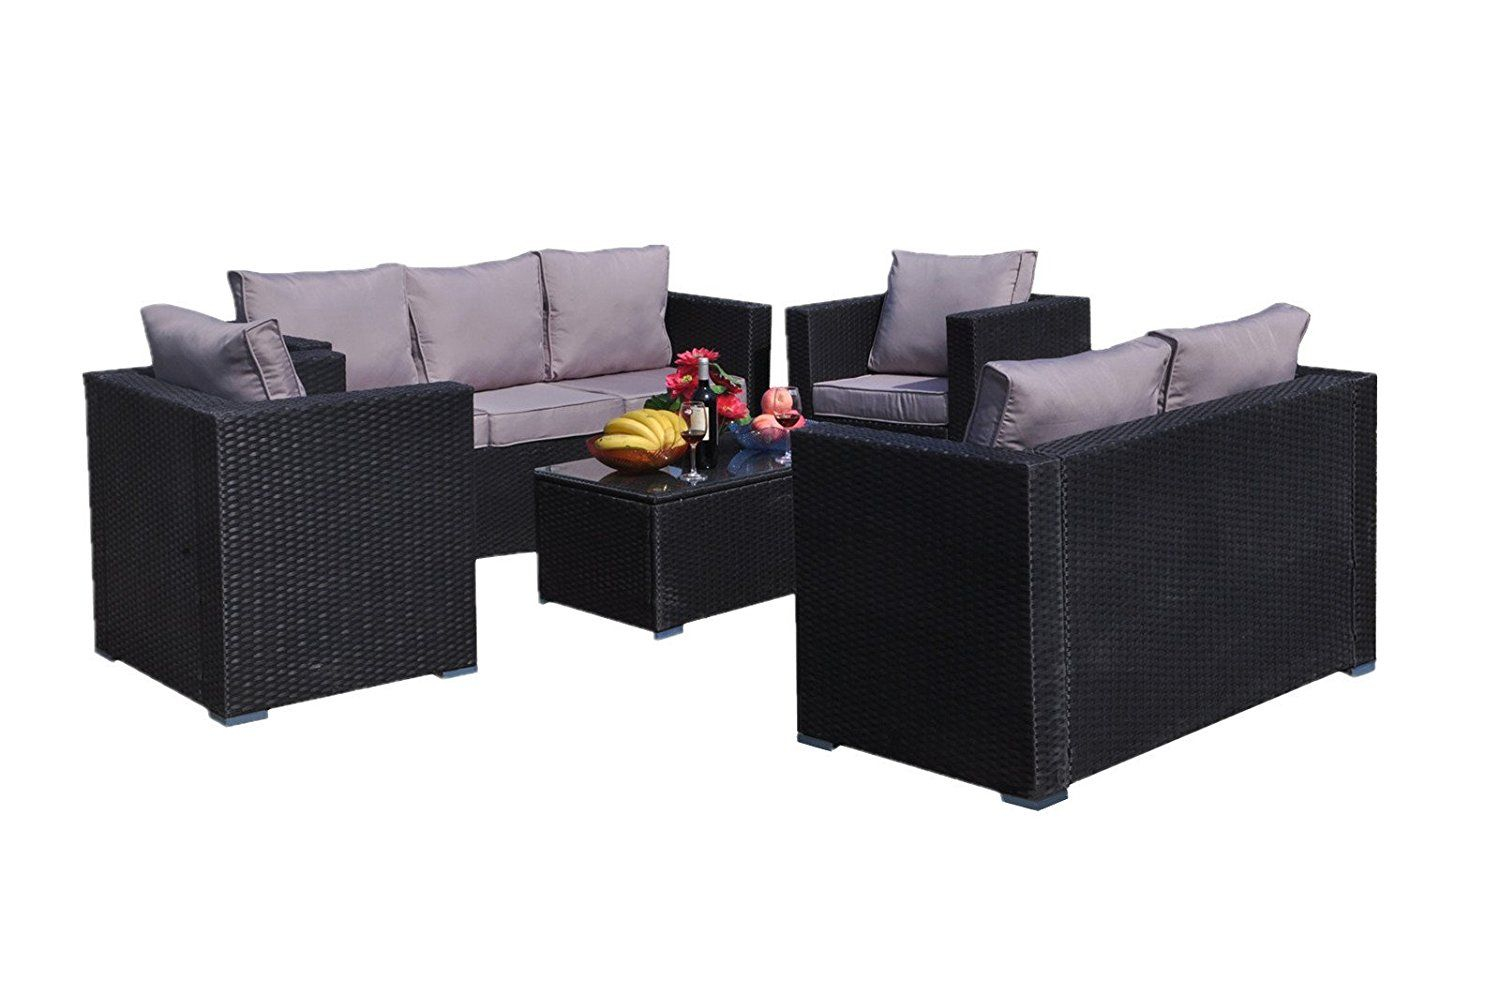 Yakoe 8 Seater Rattan Garden Furniture Patio Conservatory in proportions 1500 X 996